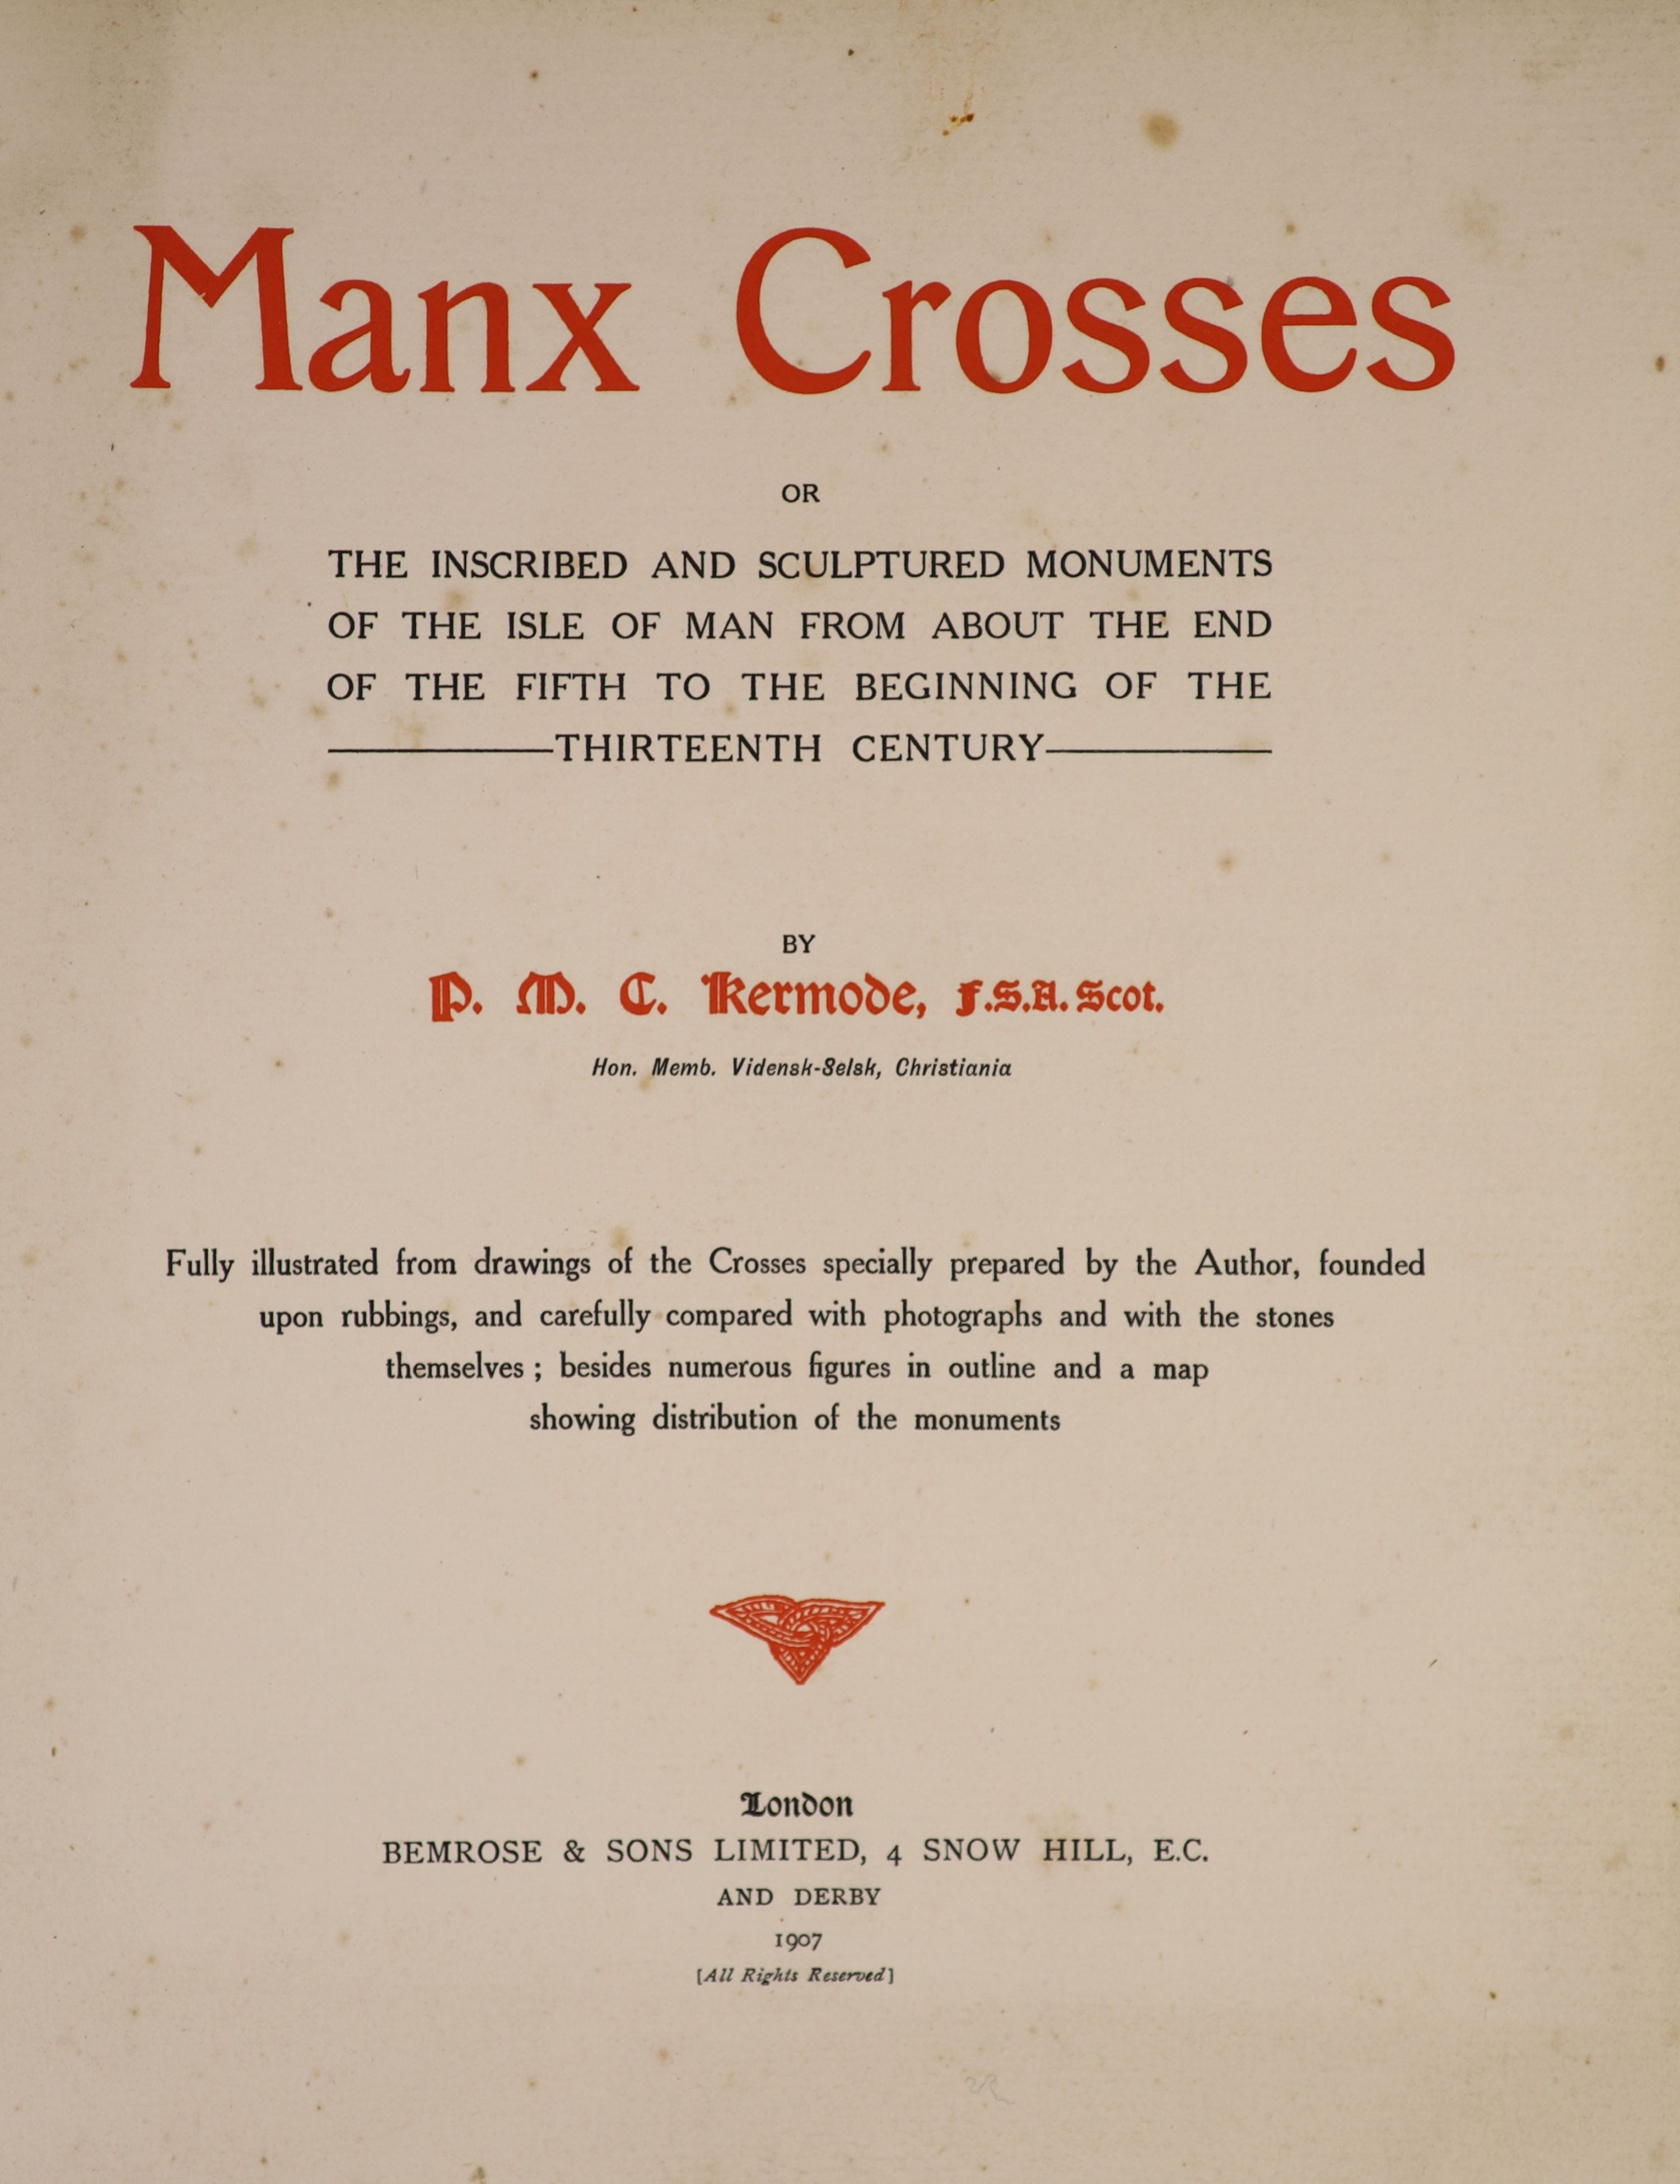 Kermode, P.M.C - Manx Crosses or the Inscribed and Sculptured Monuments of the Isle of Man, 4to, original cloth, with frontis, 2 coloured maps and 66 plates, London, 1907